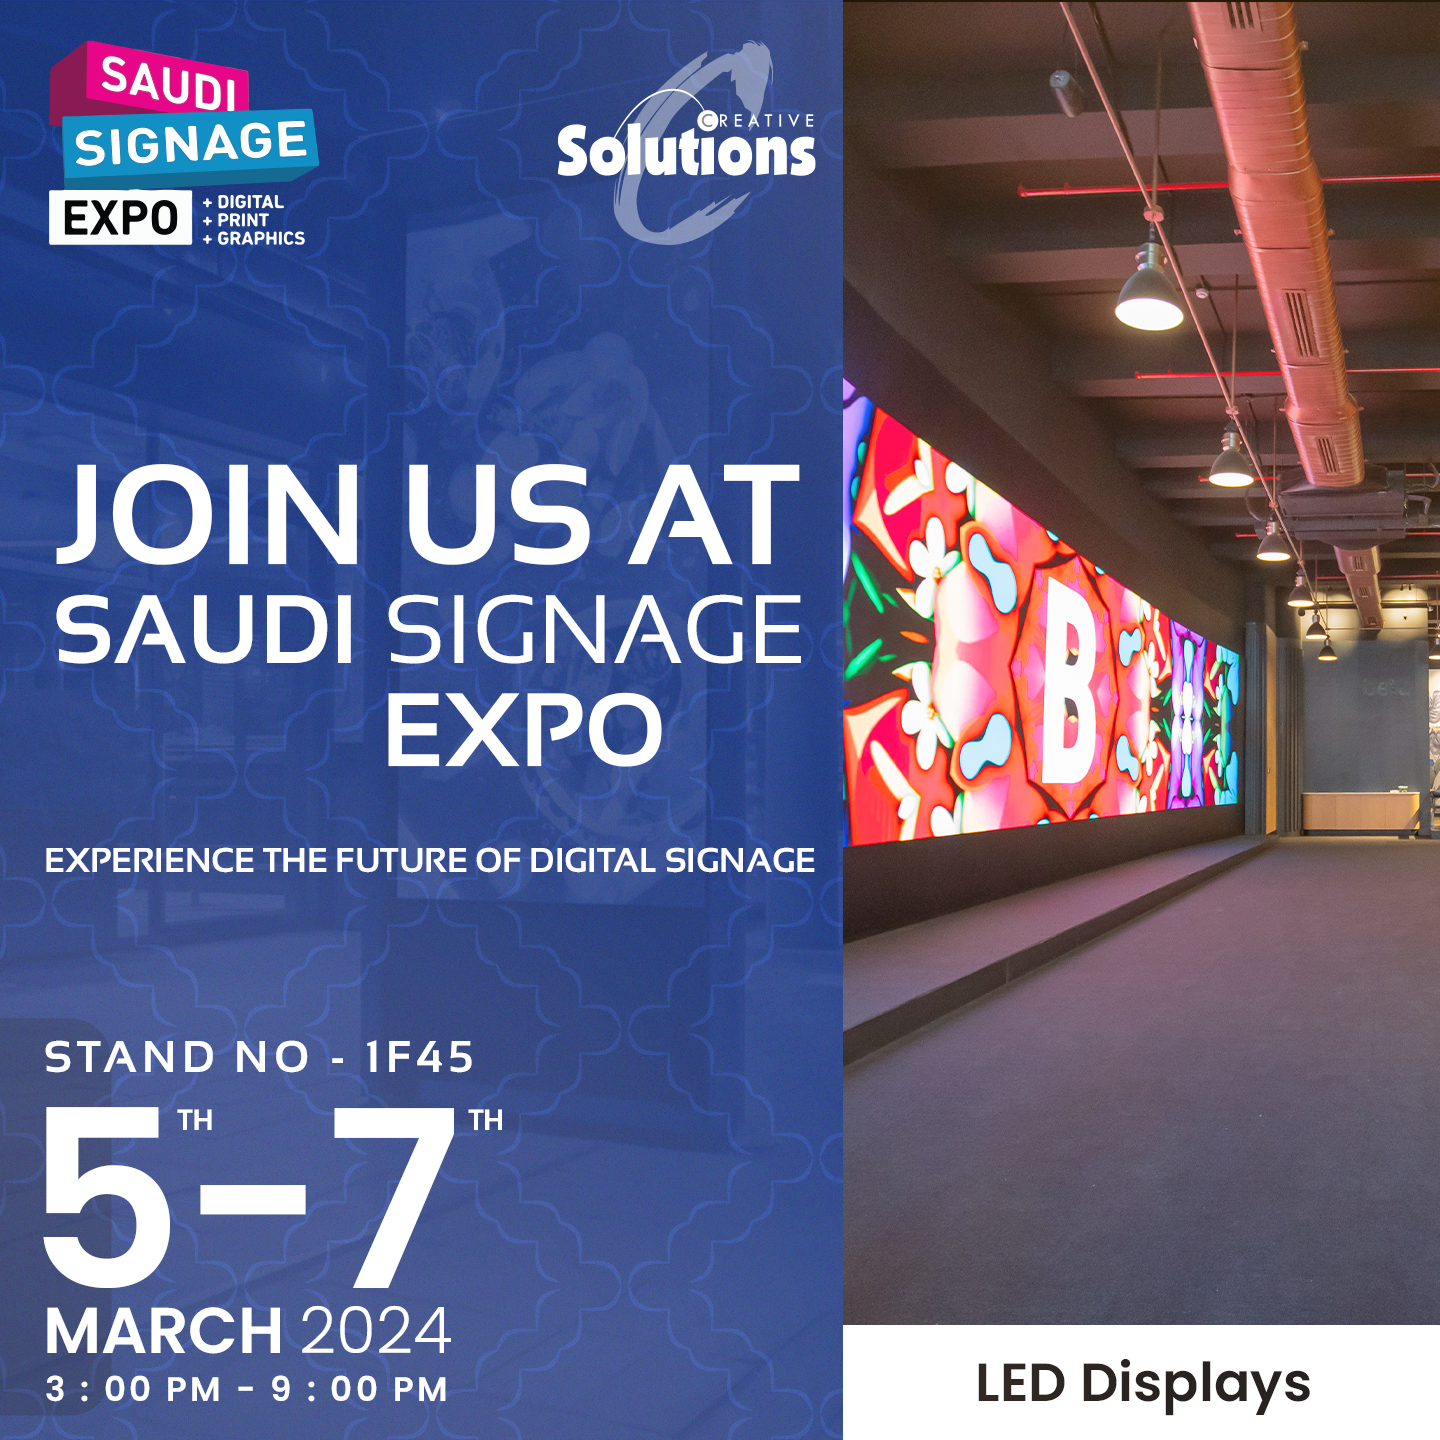 Engage Audiences with the Future: Creative Solutions at the Saudi Signage Expo 2024